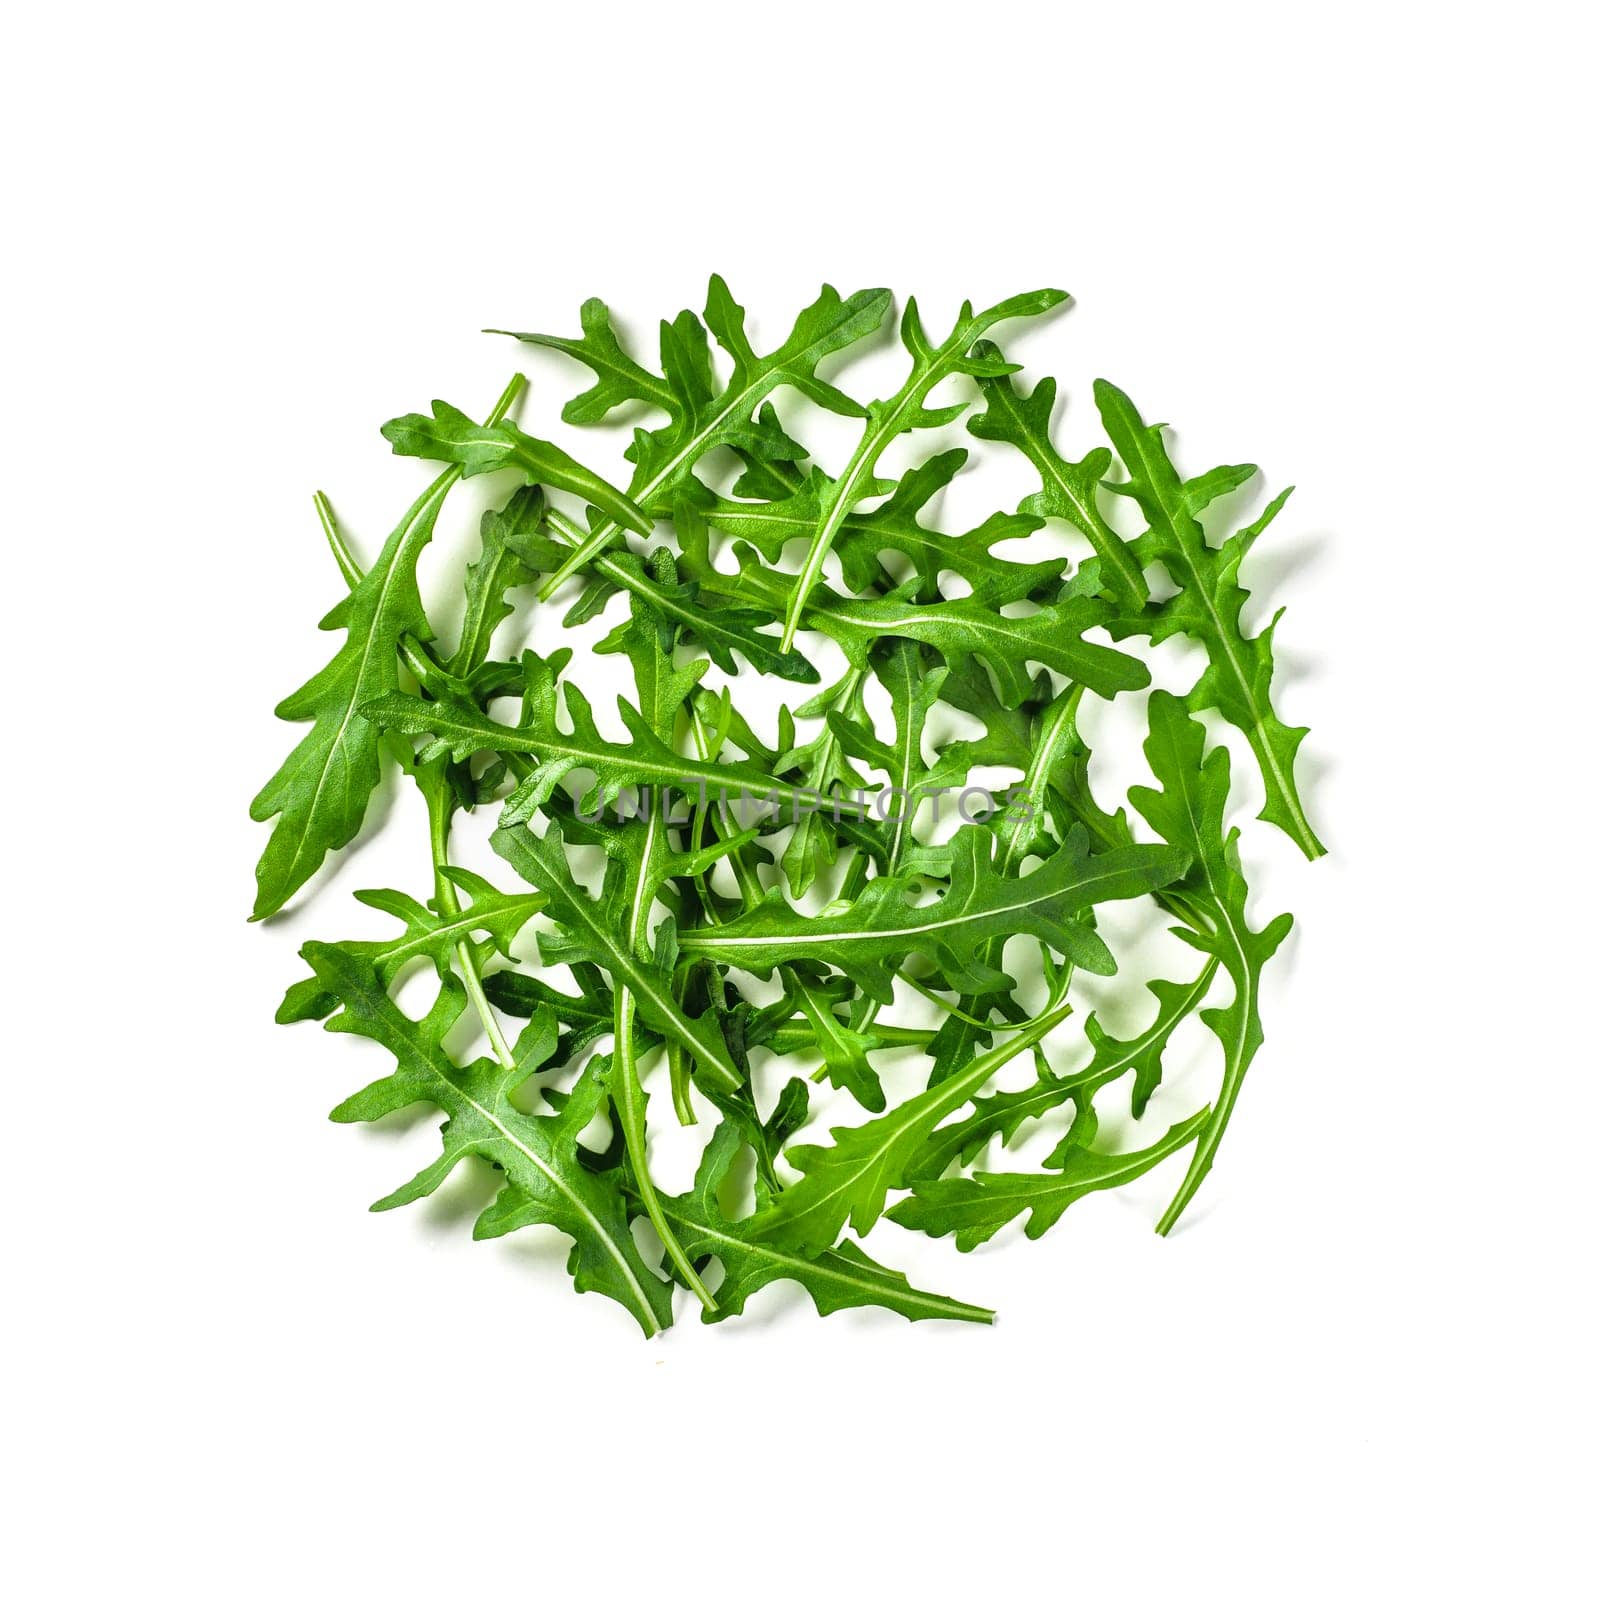 Heap of arugula leaves. Fresh green arugula or rucola leaves isolated on white with clipping path. Top view or flat lay